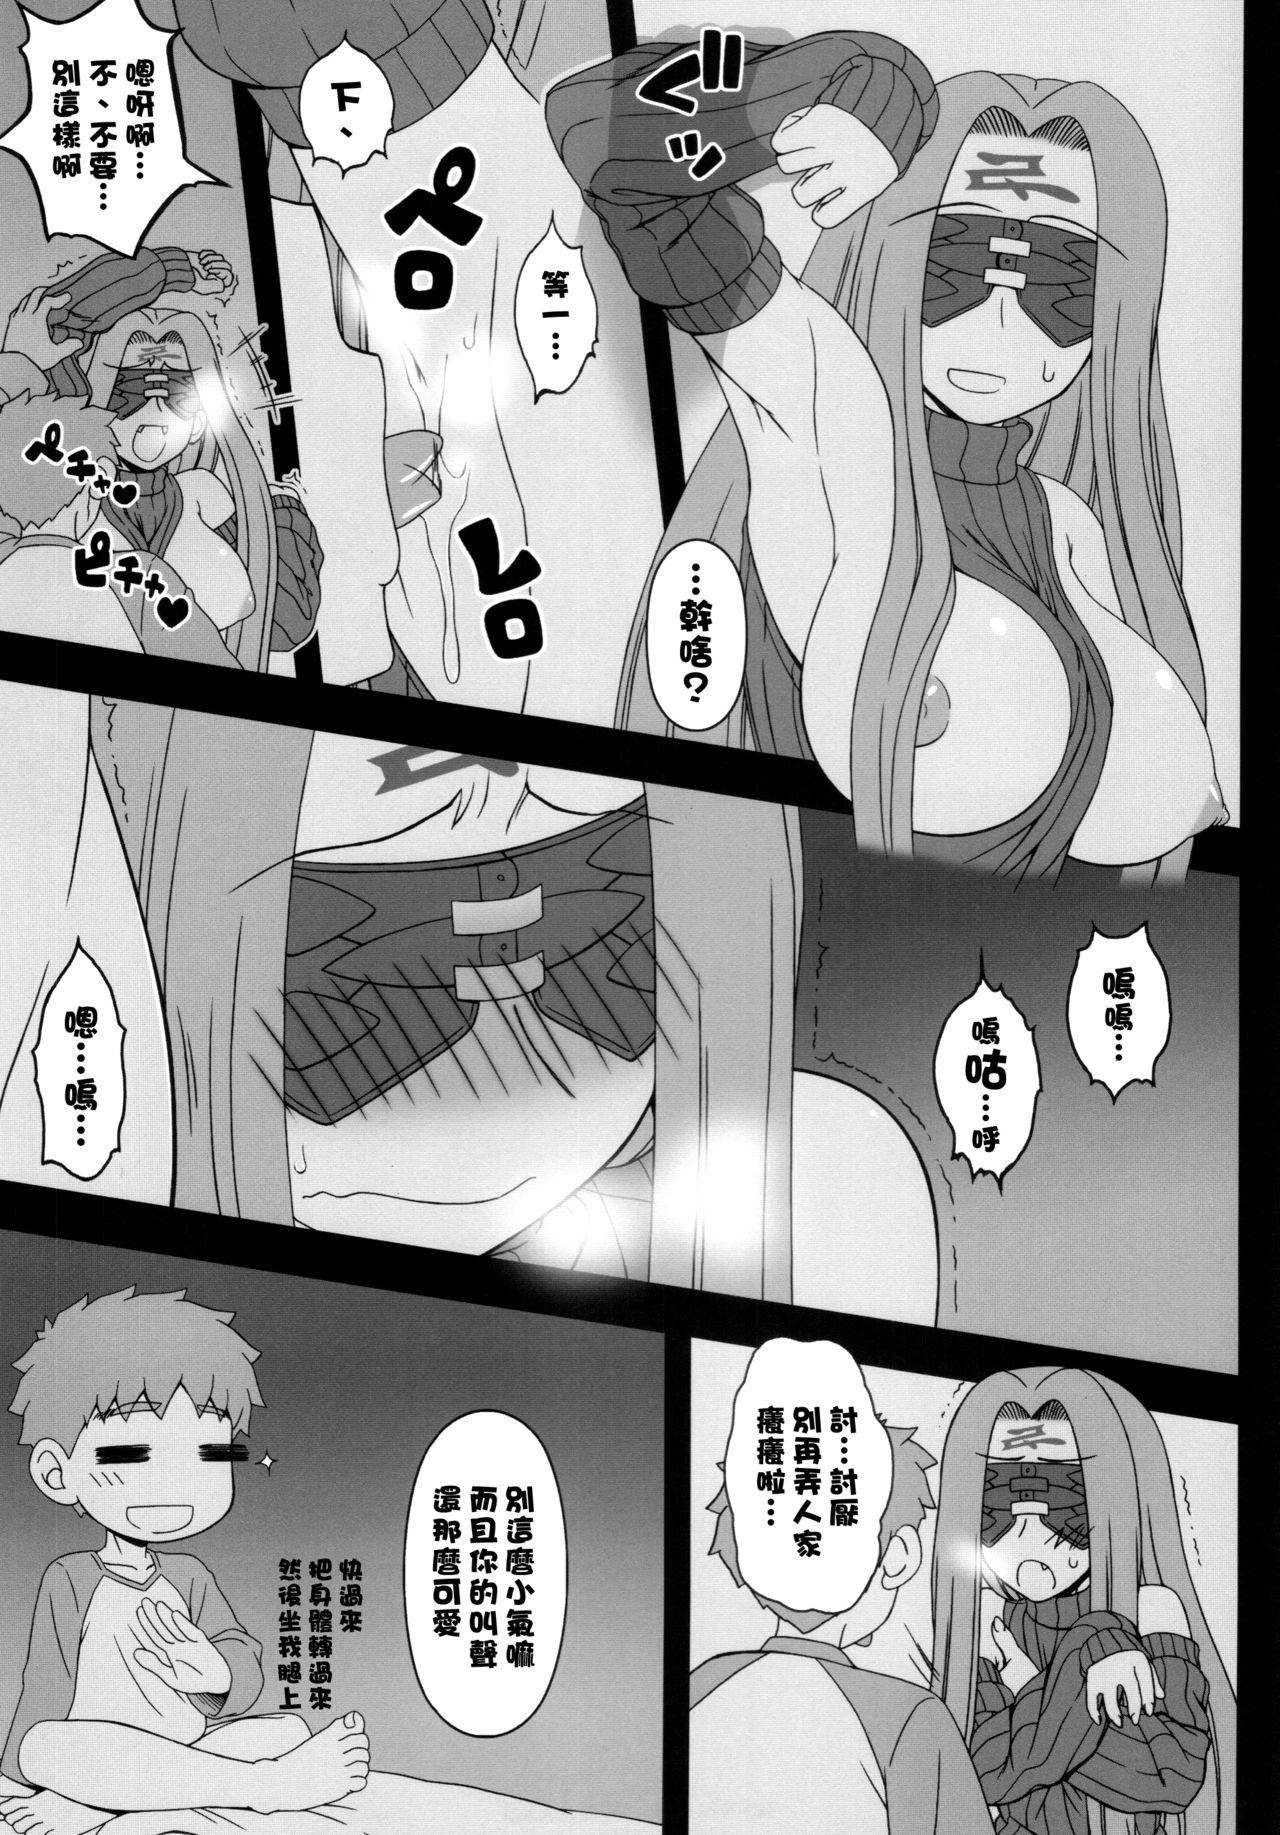 First Oshiire no Medusa - Fate stay night Caught - Page 9